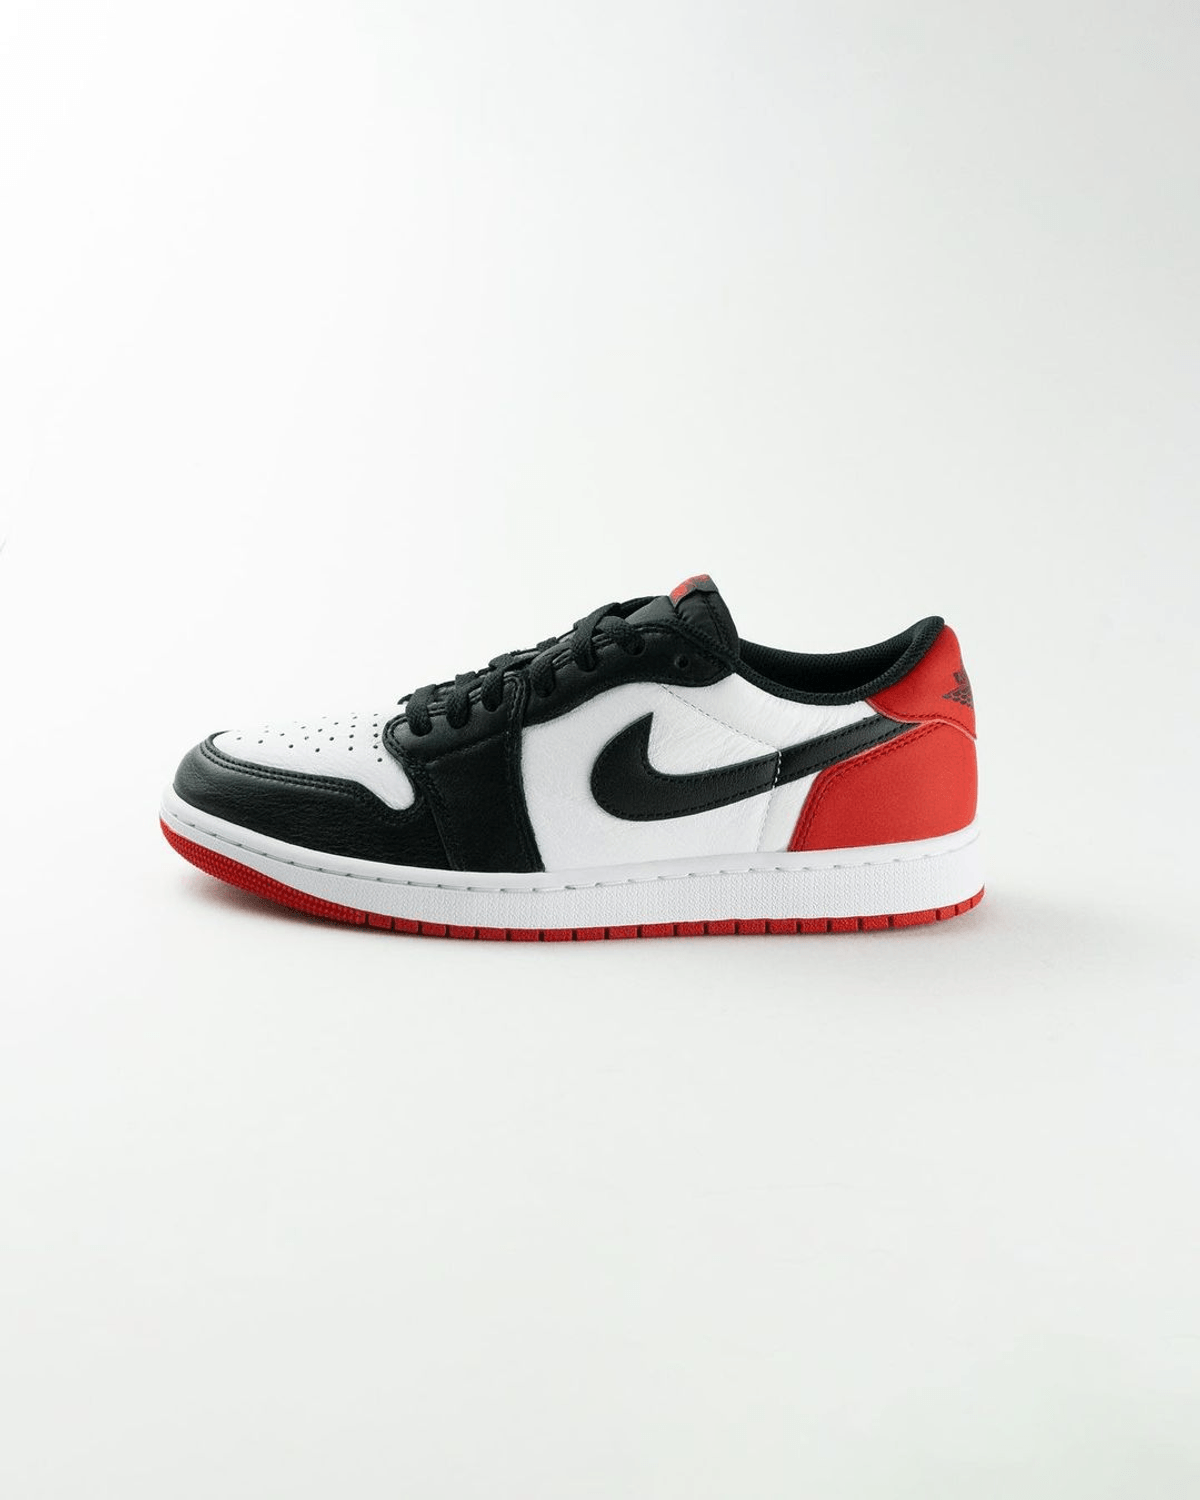 The Air Jordan 1 Low OG Black Toe Is Slated For An August Release